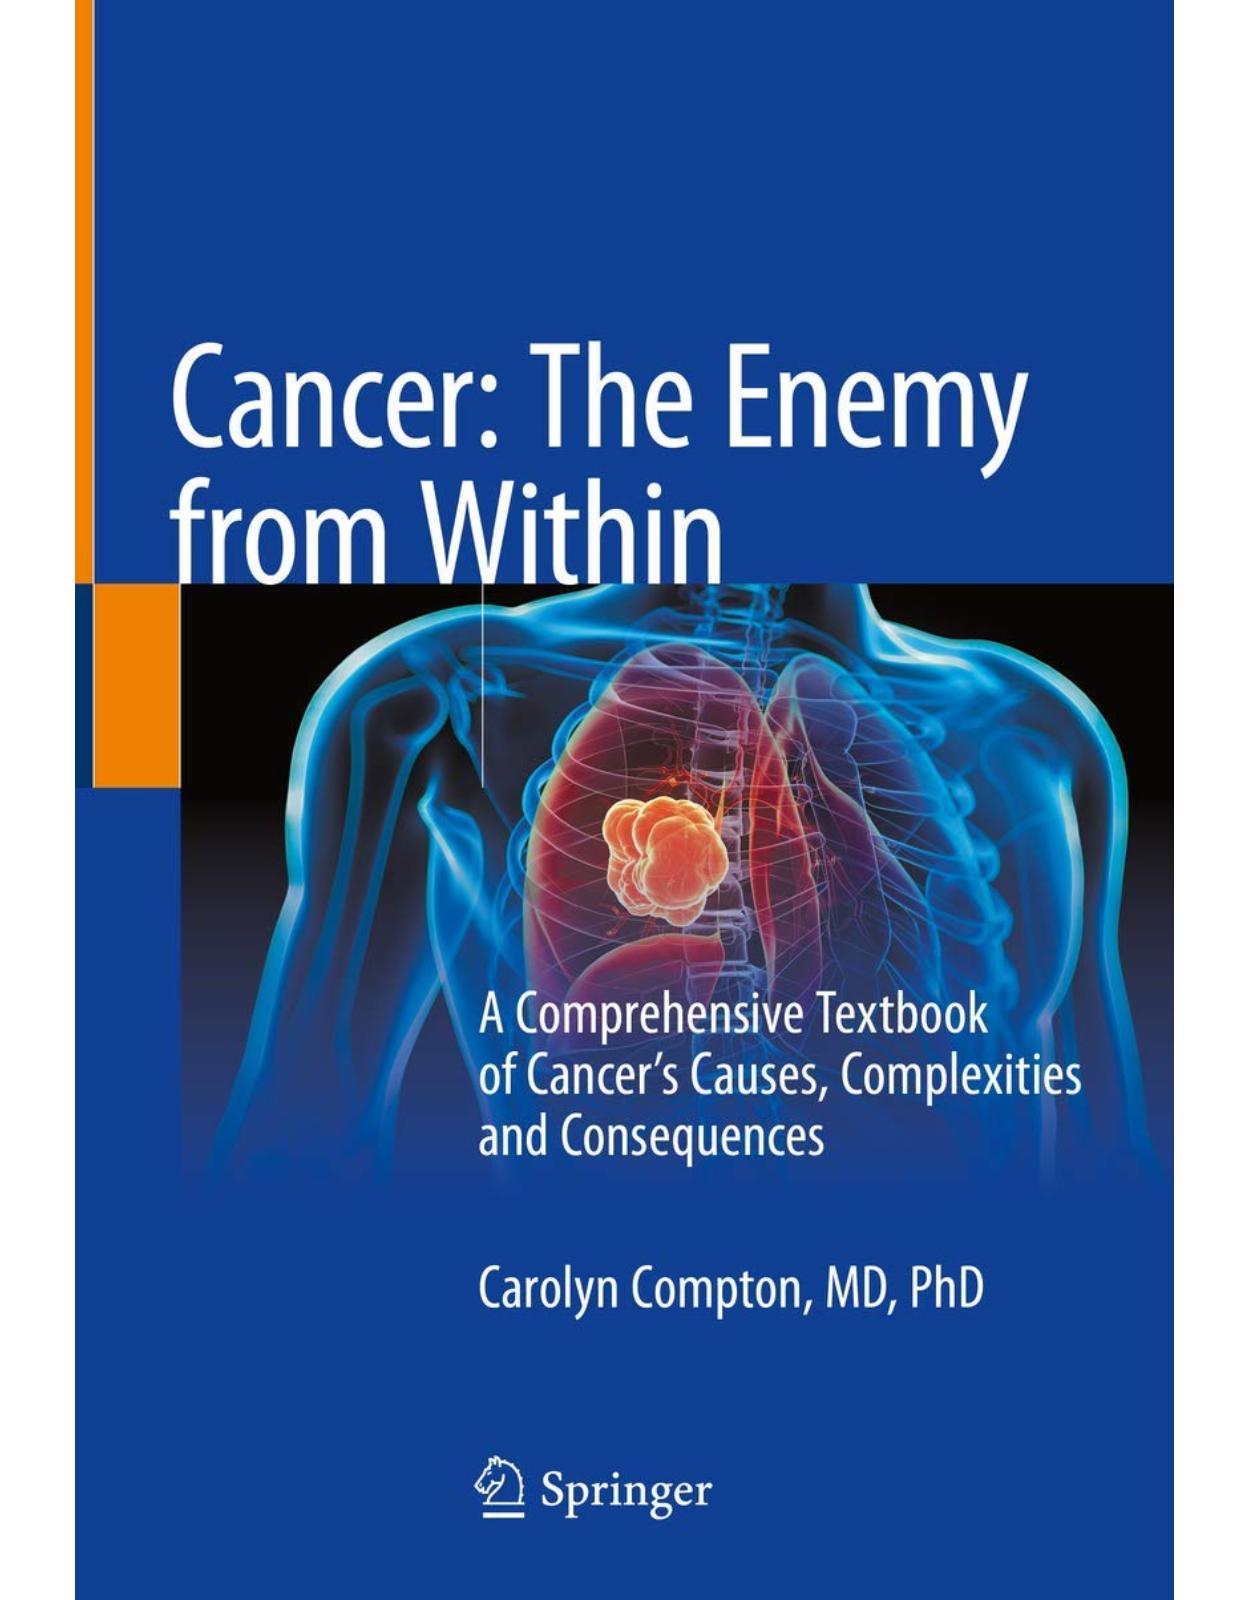 Cancer: The Enemy from Within